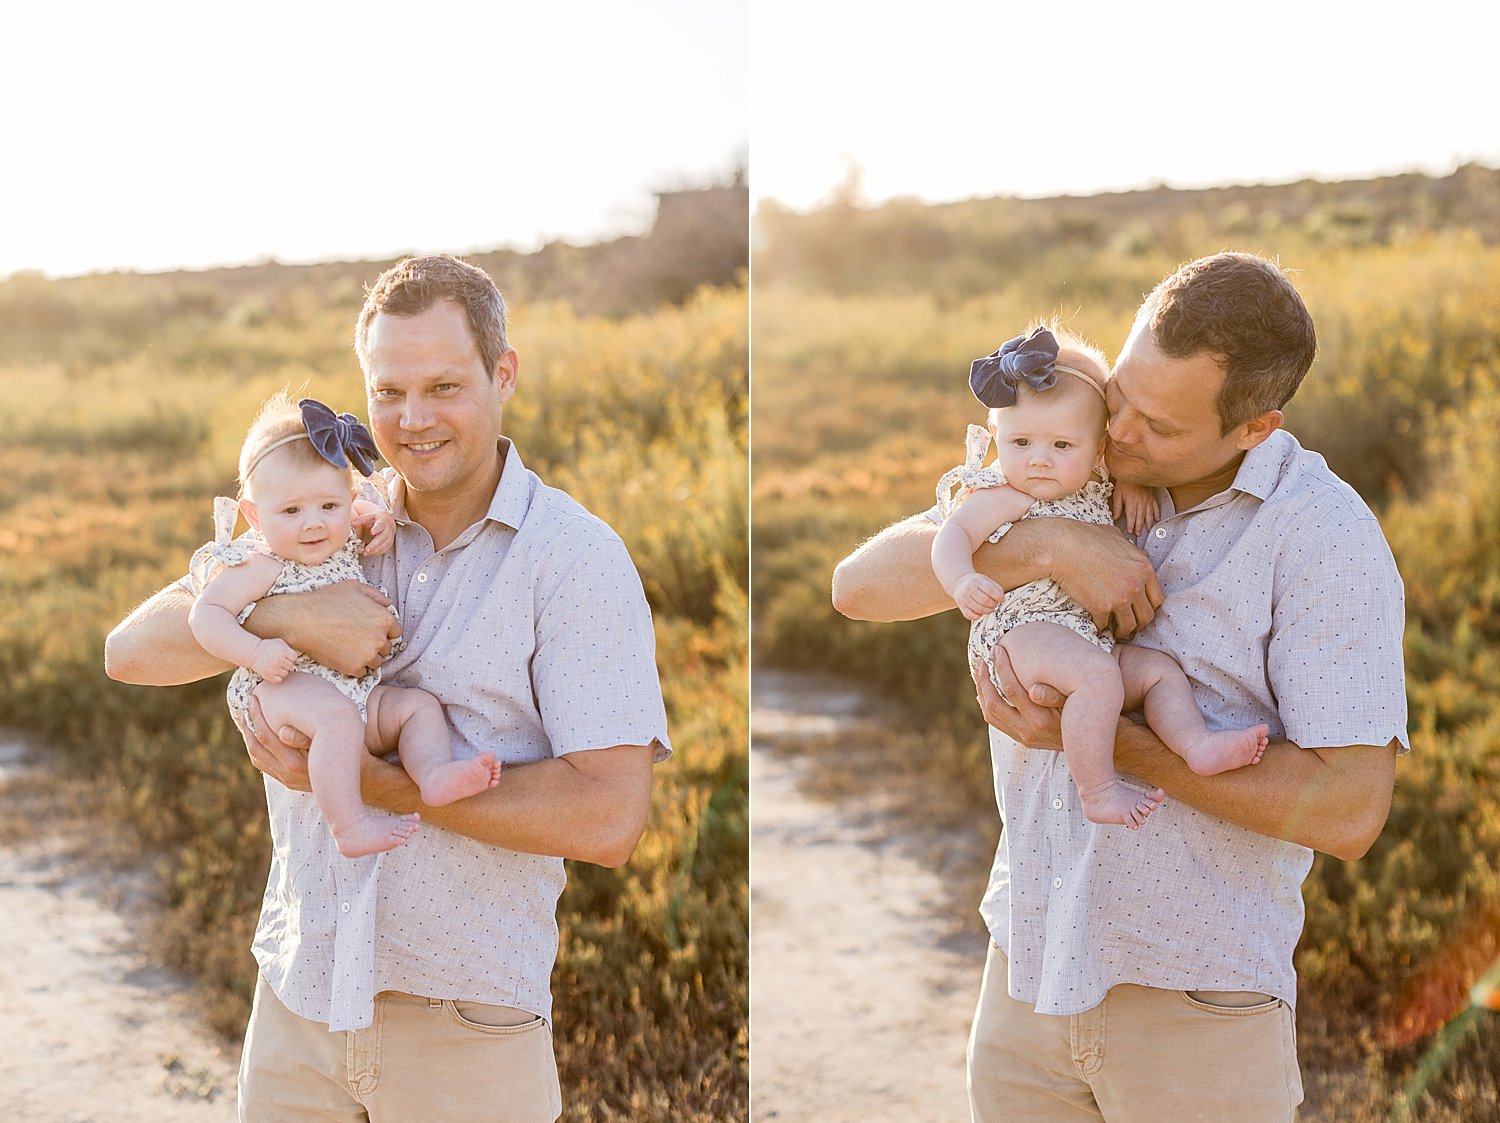 Daddy holding his baby girl for six month photos with Ambre Williams Photography.